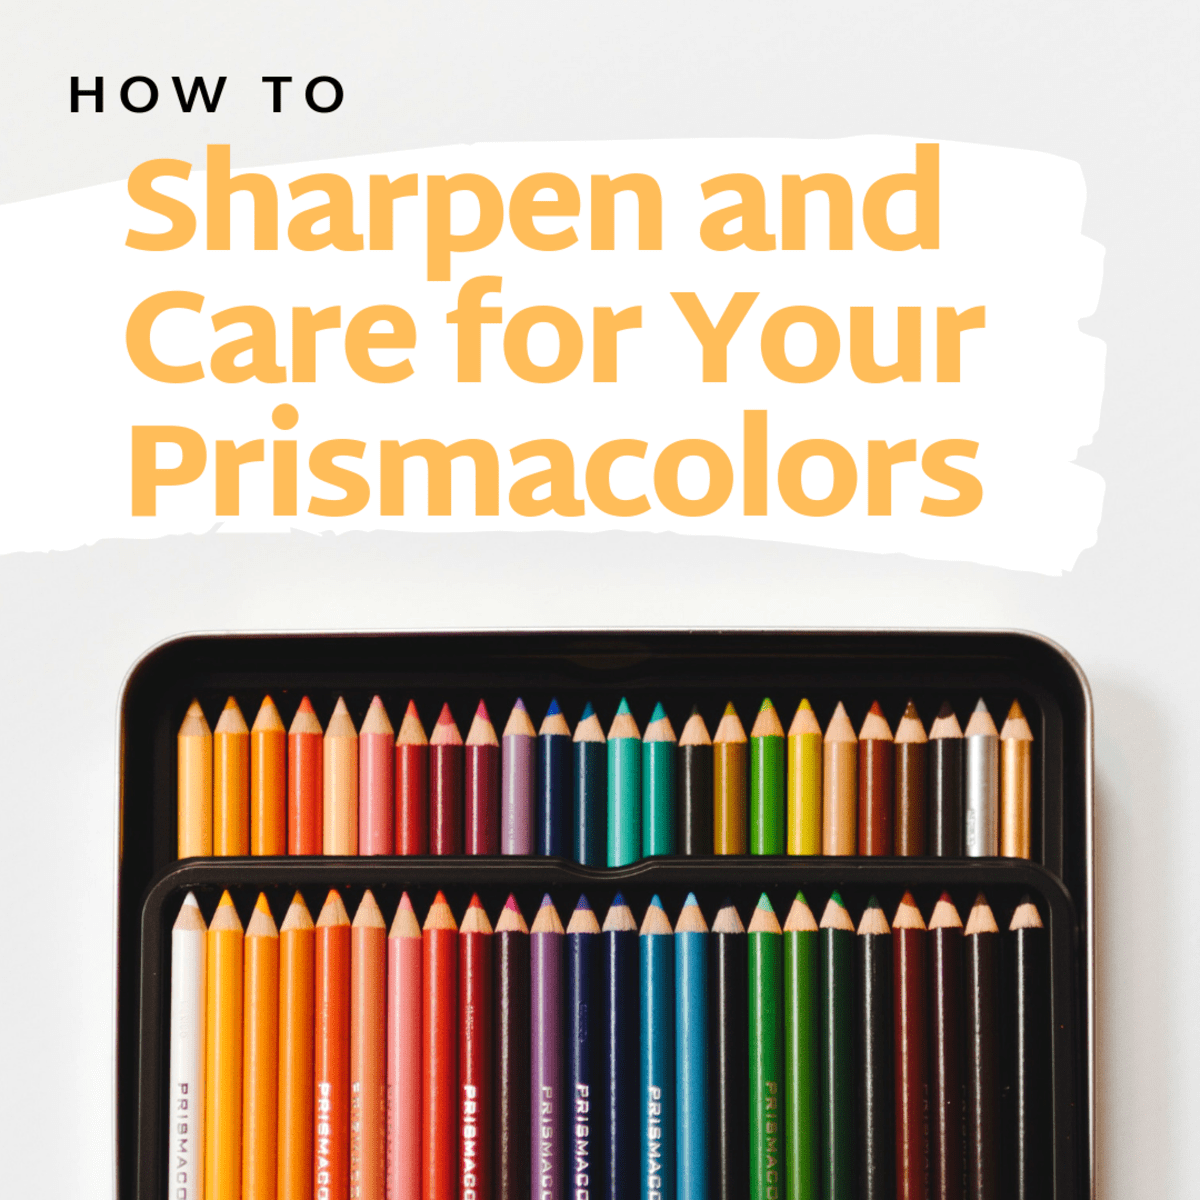 What is the best pencil sharpener for Prismacolor colored pencils? - Quora